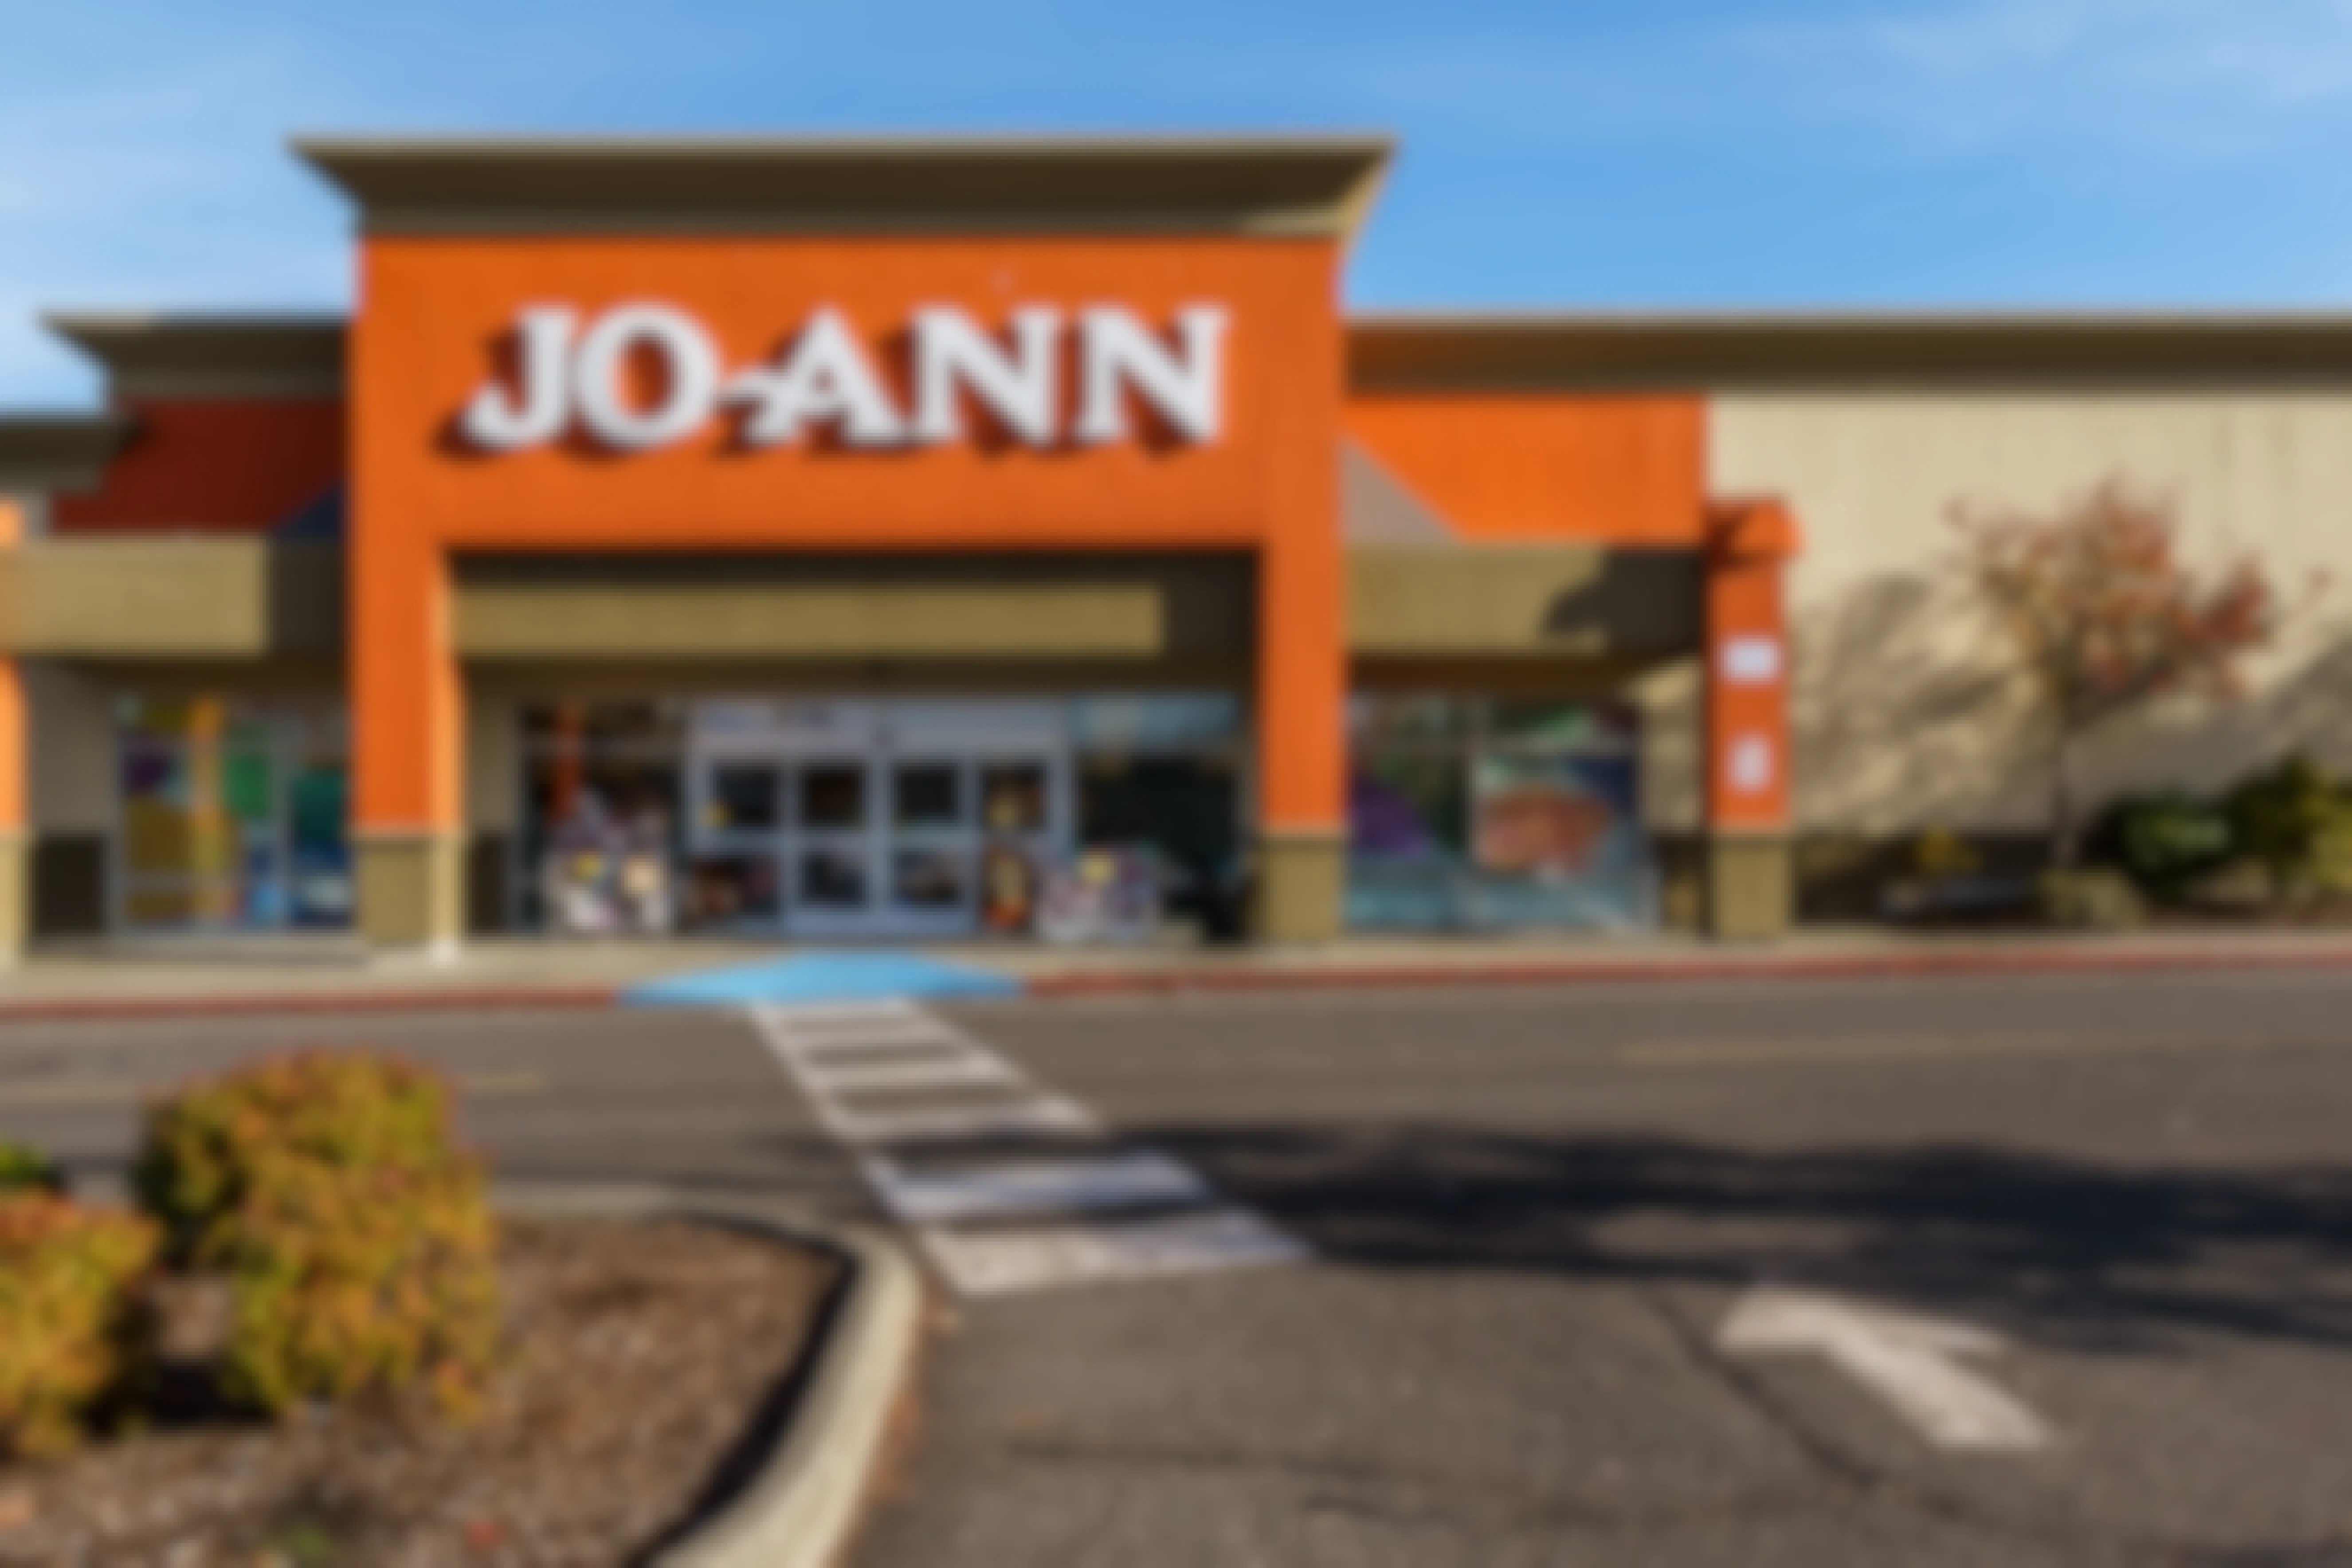 JOANN craft storefront and parking lot.